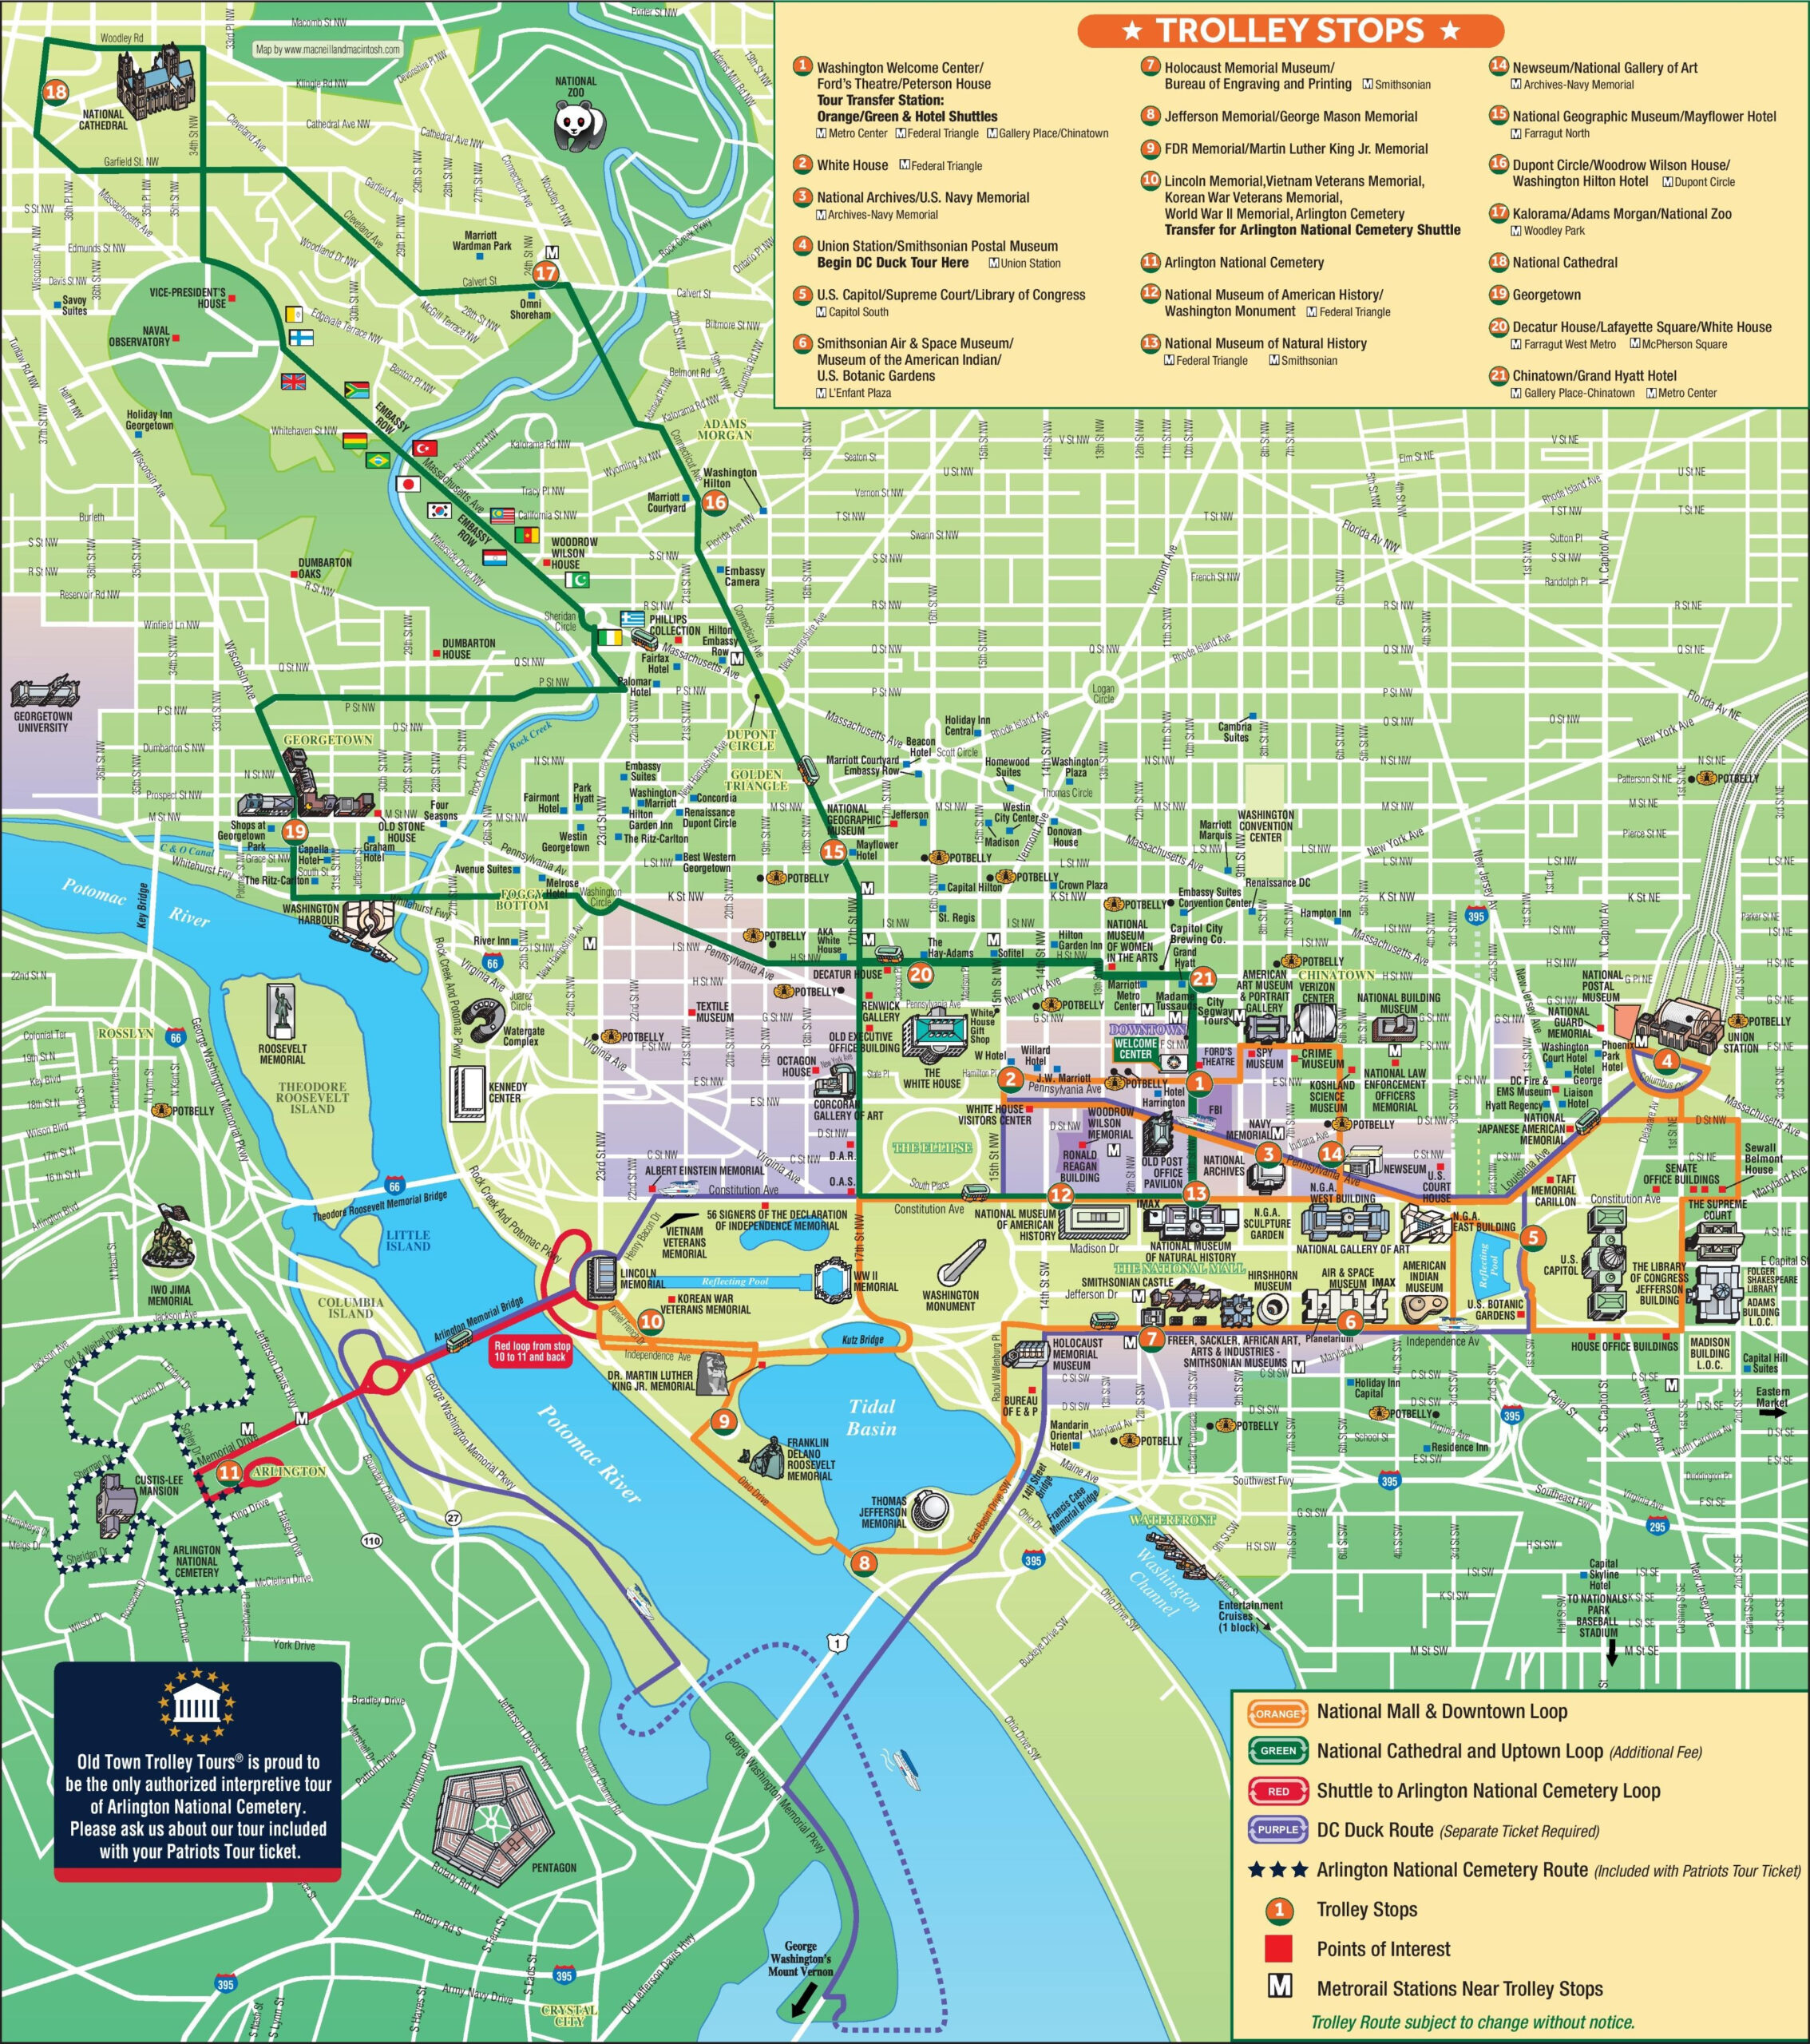 Washington Dc Tour Guide Map Best Hotel Tour And Travel